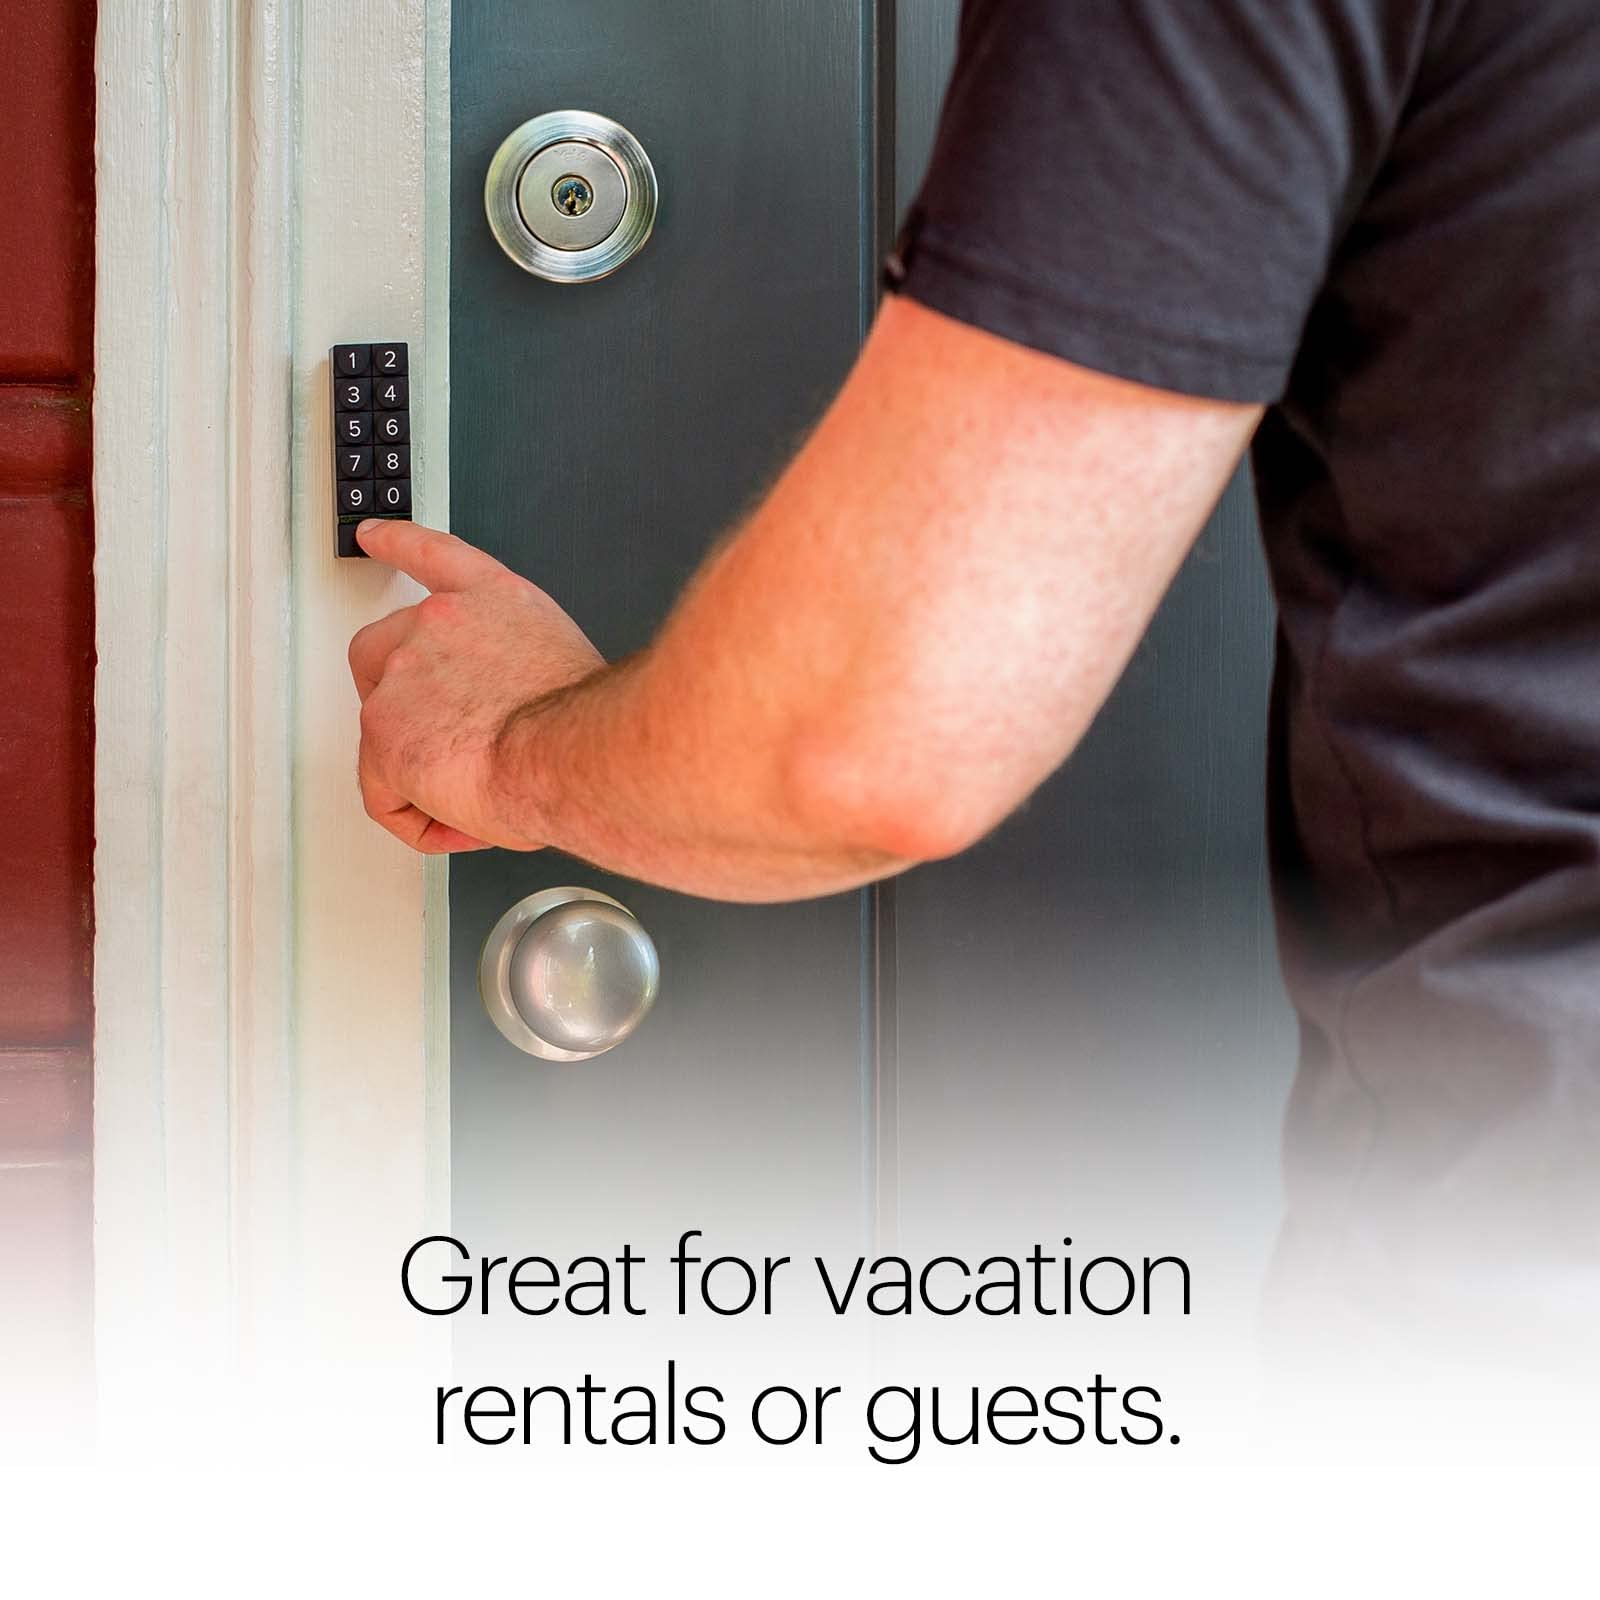 August Home Smart Keypad, Pair with Your August Smart Lock - Grant Guest Access with Unique Keycodes, Dark Gray